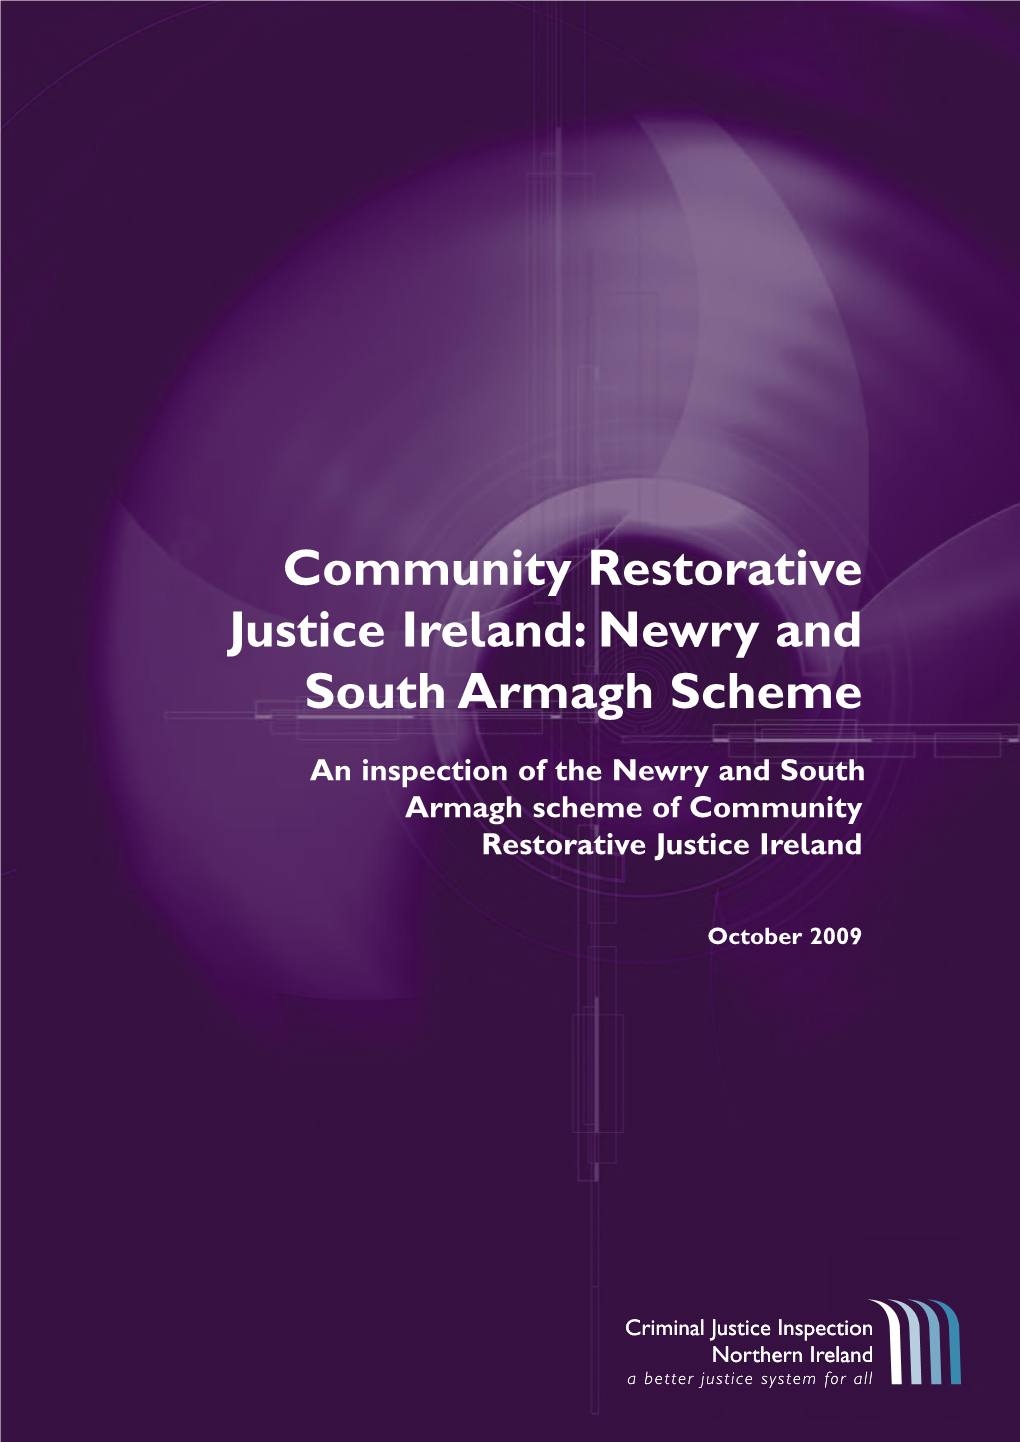 Newry and South Armagh Scheme